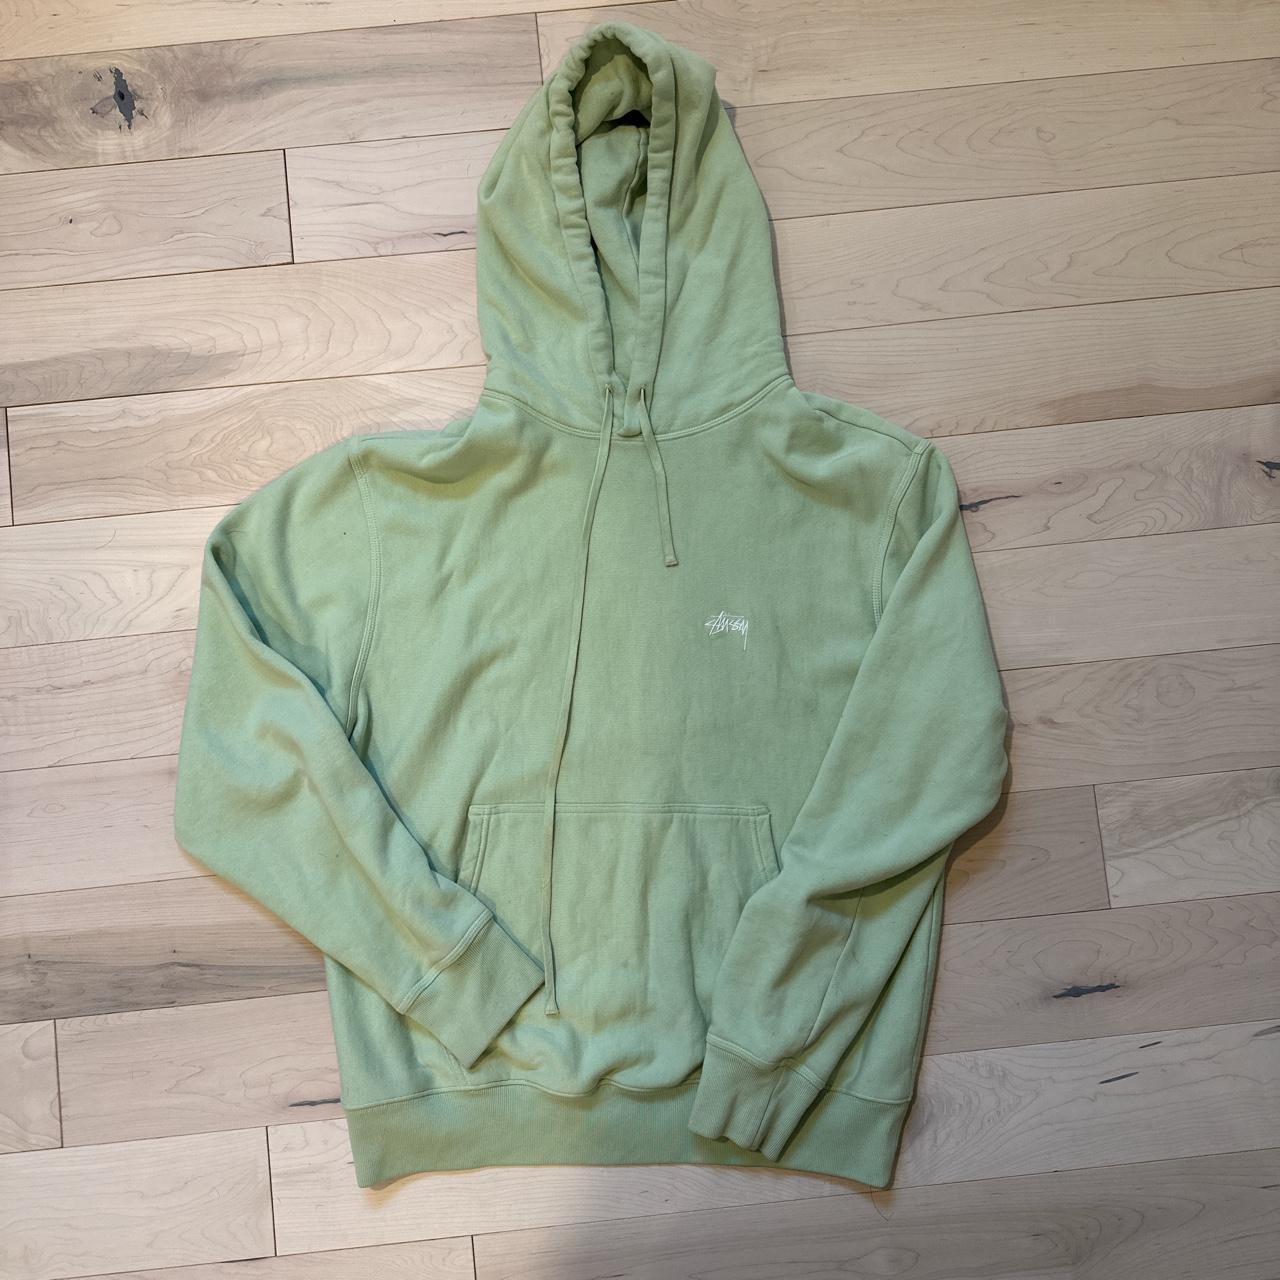 Stüssy overdyed stock logo hoodie. Bought in 2020...